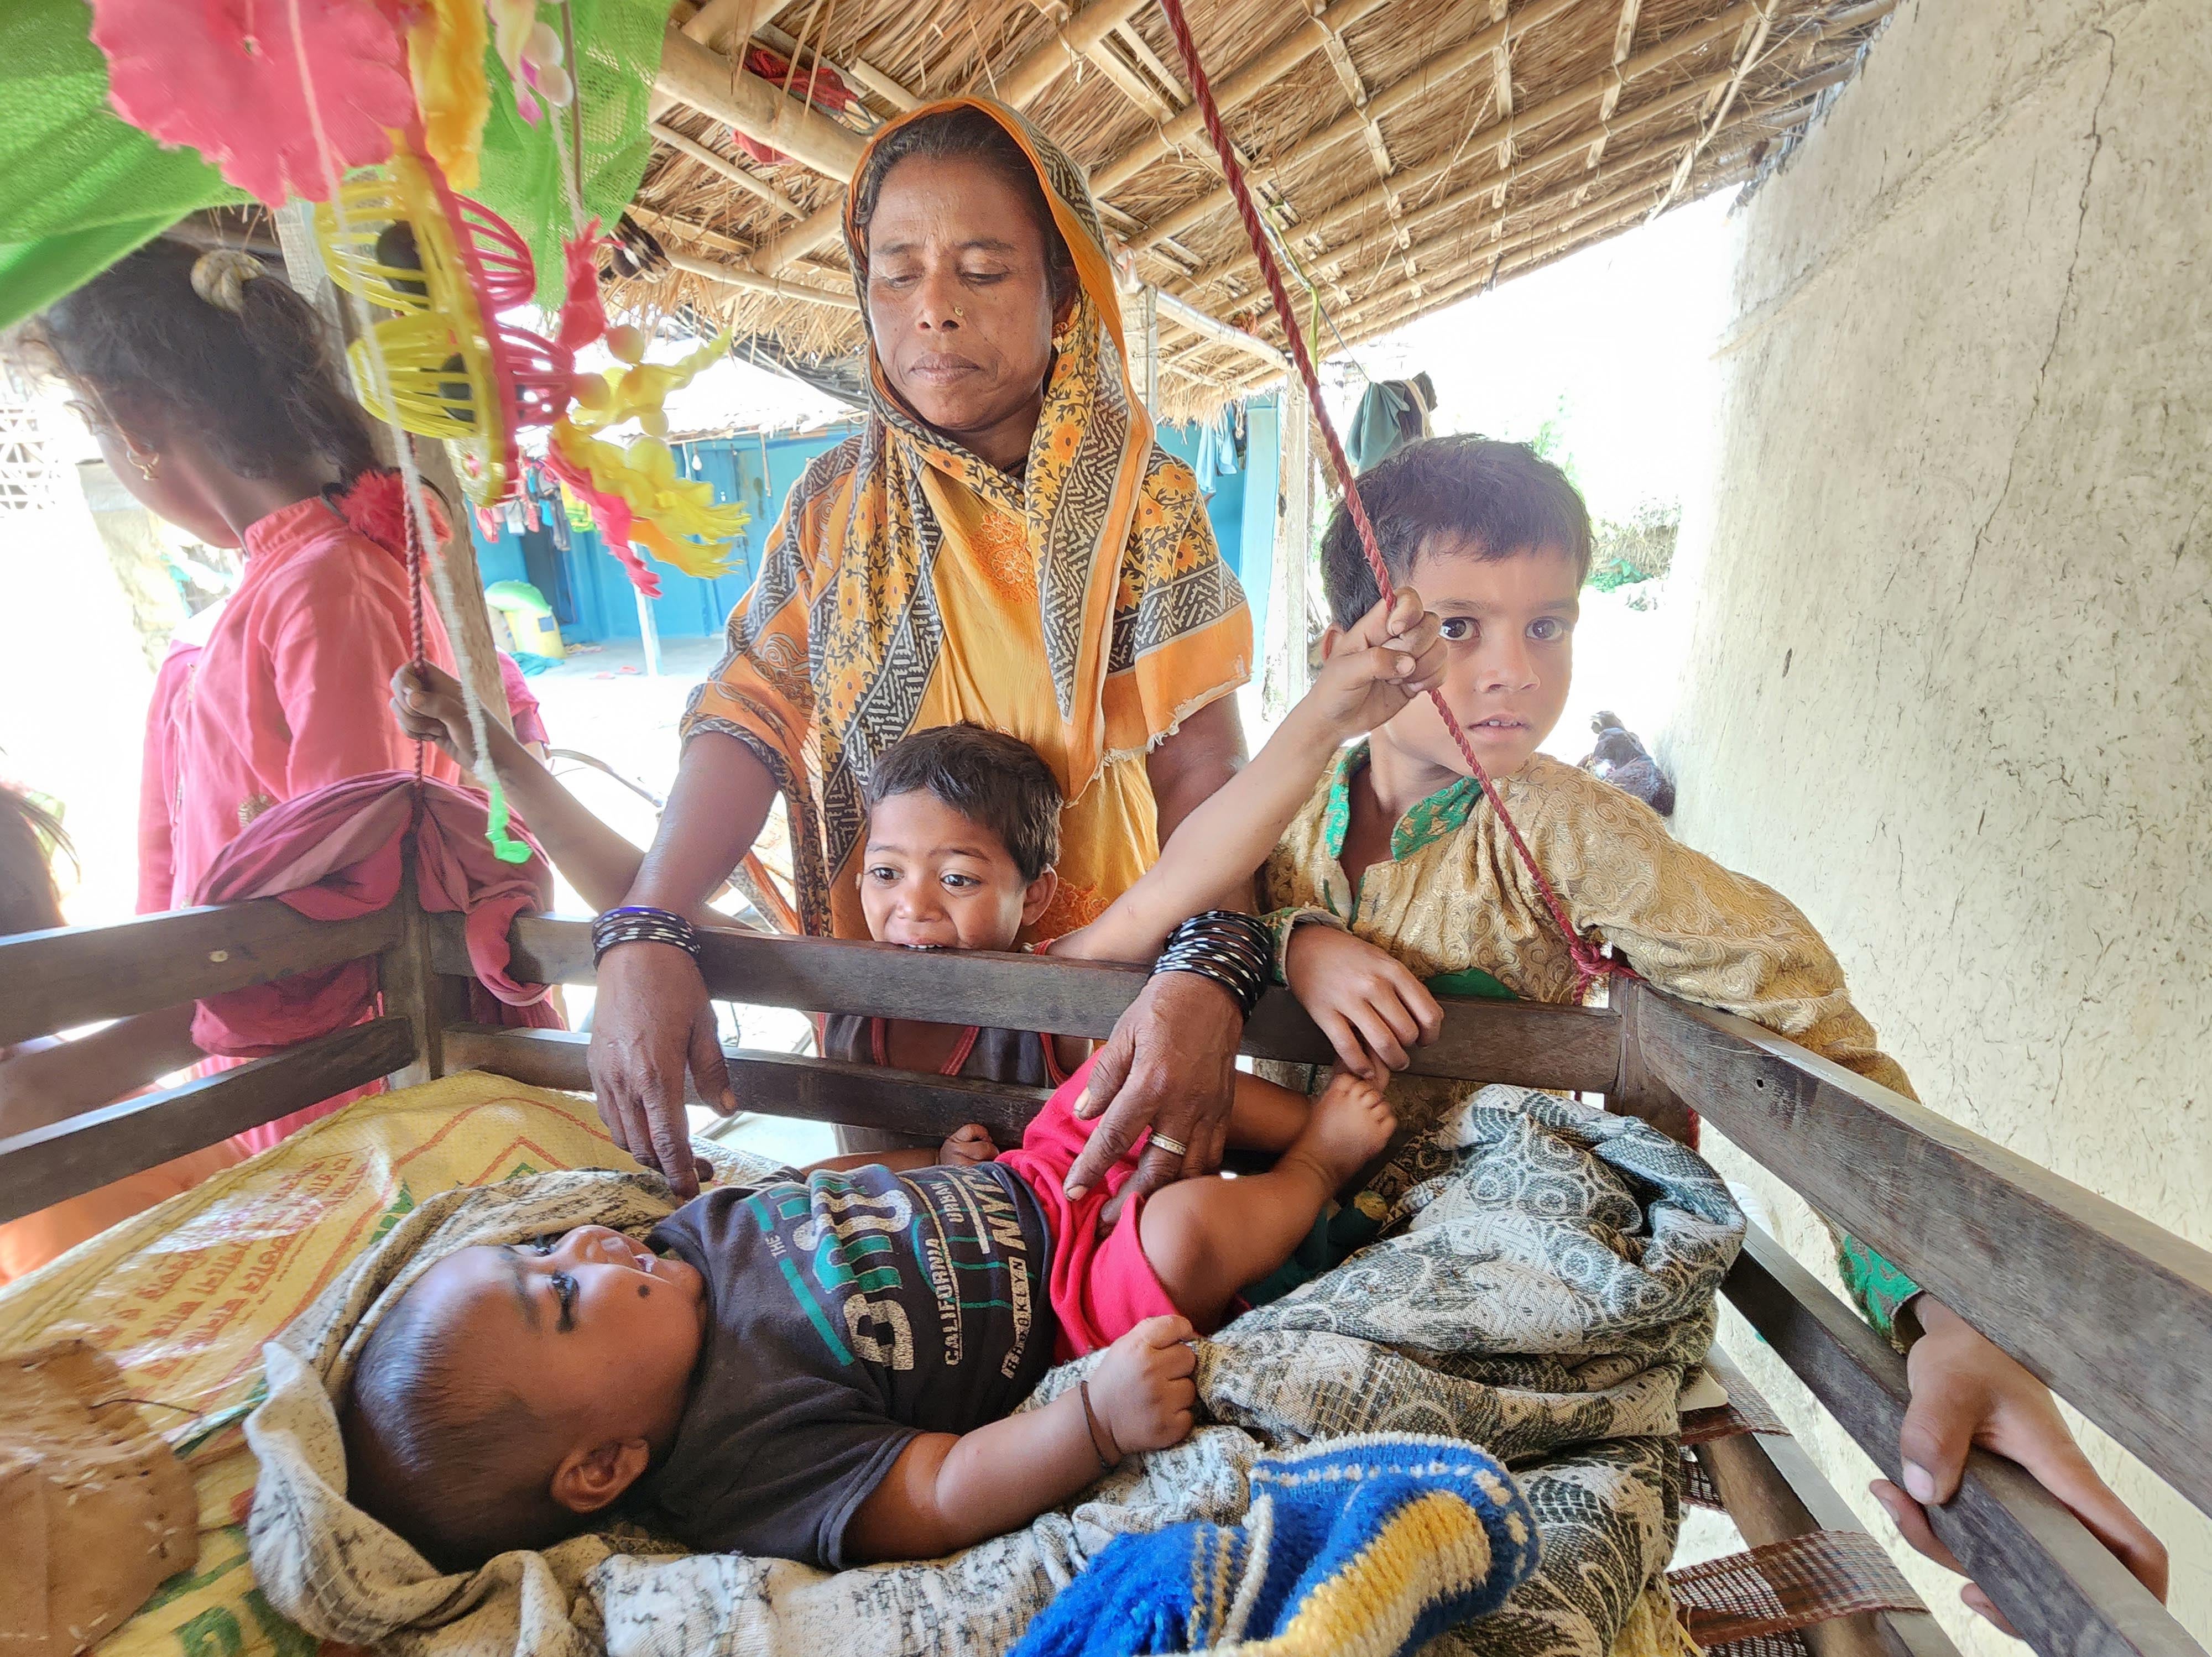 Parveen Begum, who has had 11 children, tends to her latest child as her extended family huddles around her